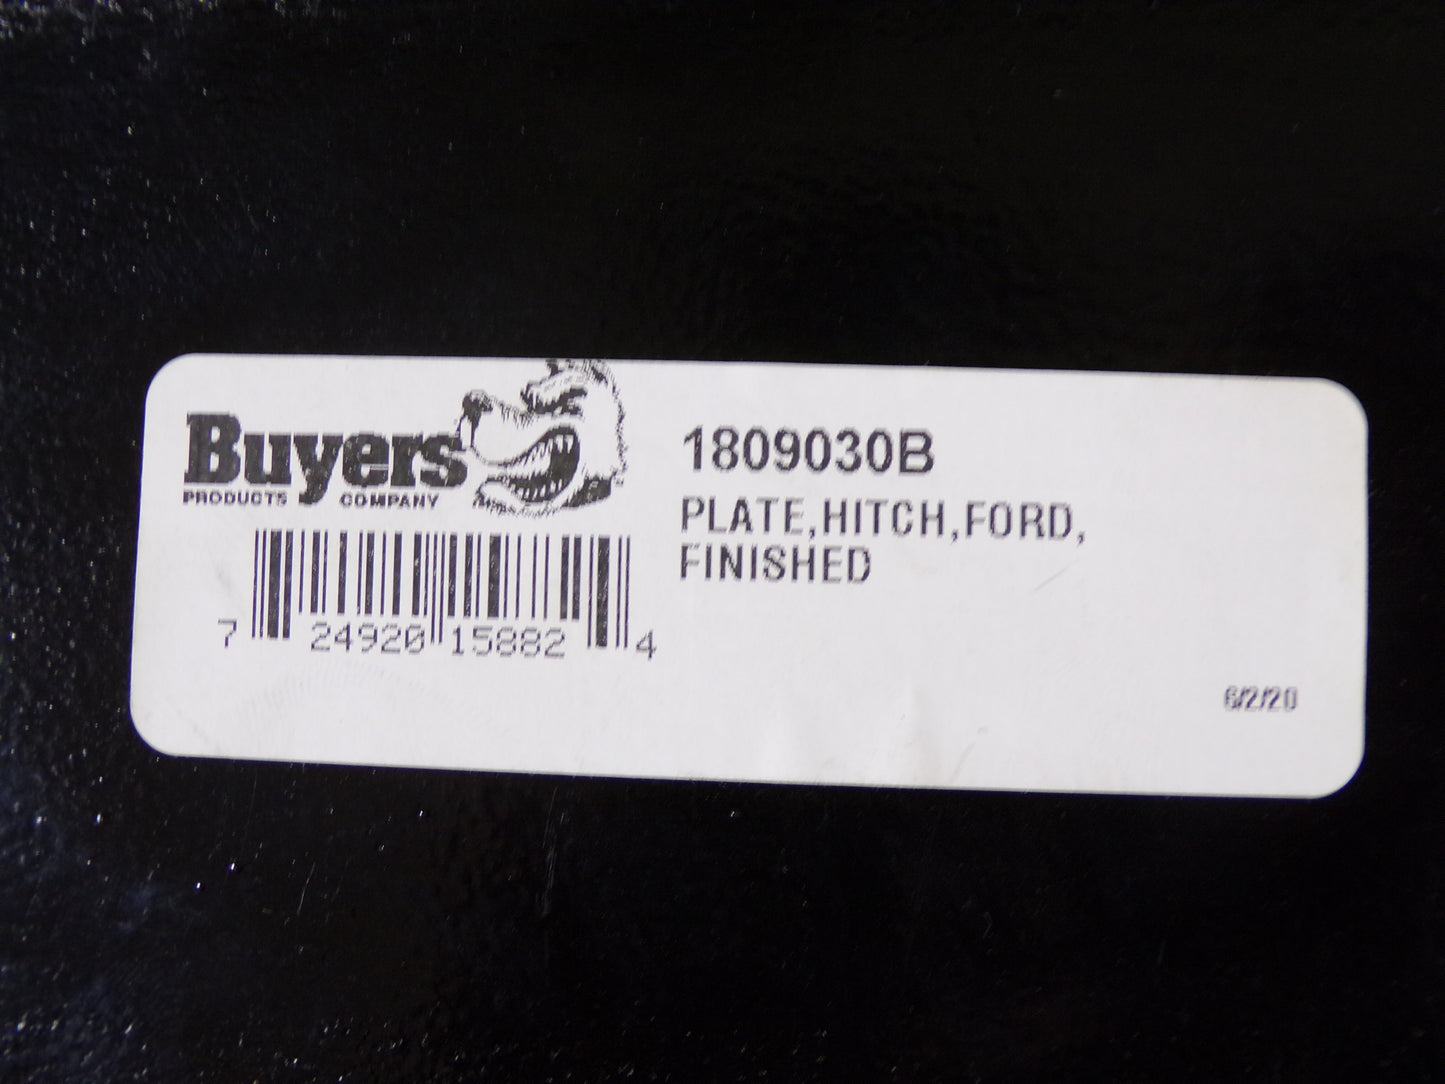 BUYERS PRODUCTS Ford Hitch Plate, 62"L, 15-1/2"H, 15000 lb. GVW, FREIGHT SHIPPING REQUIRED (CR00354-2B40)